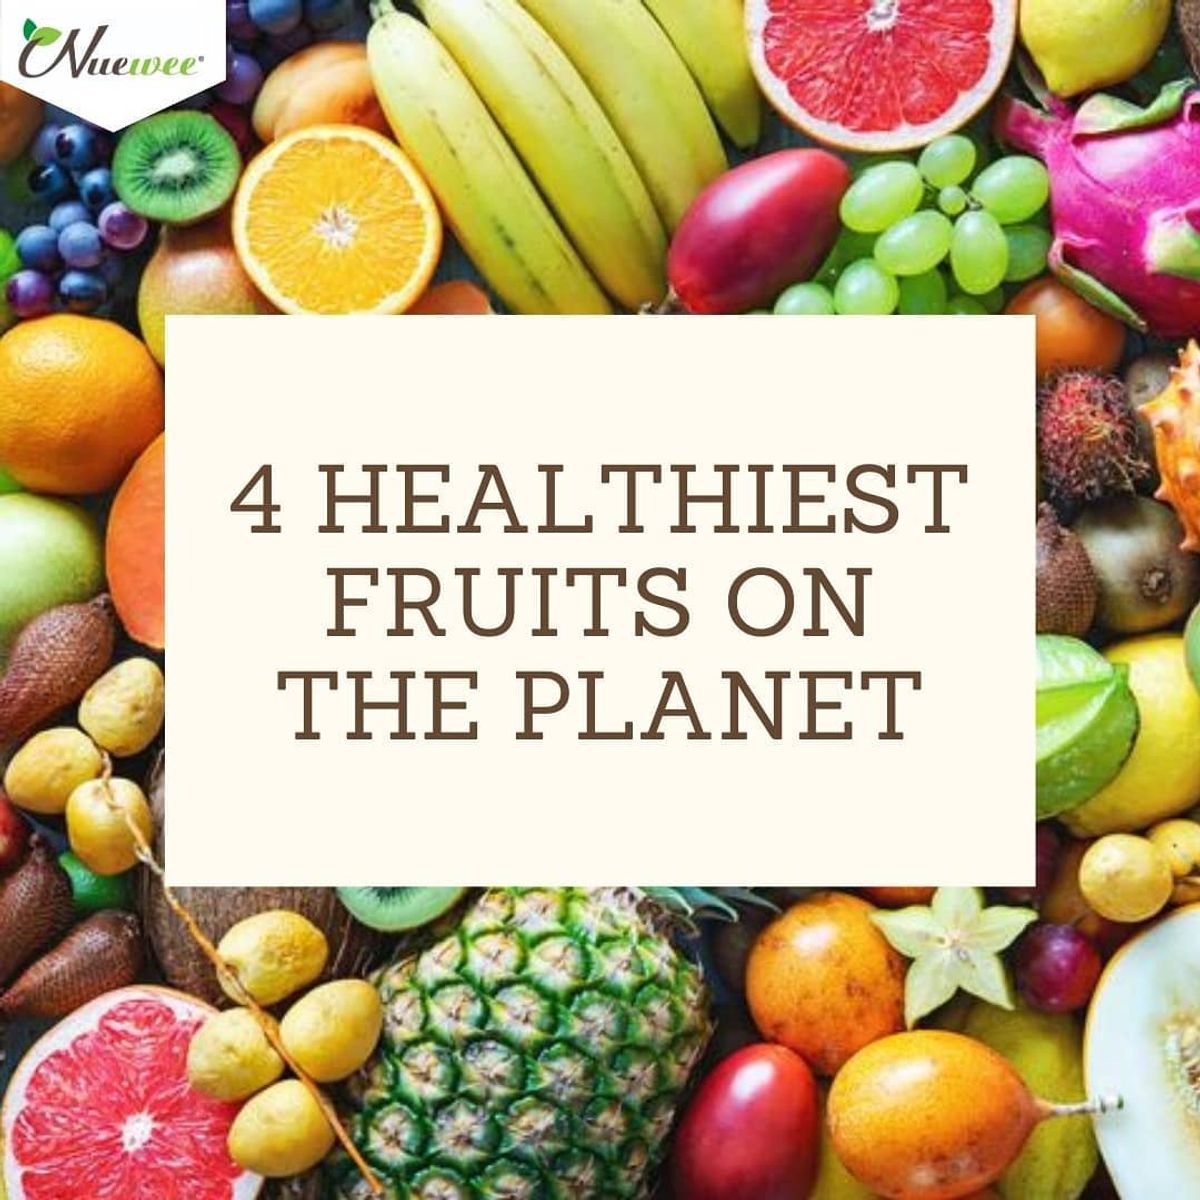 4 Healthiest Fruits on the Planet